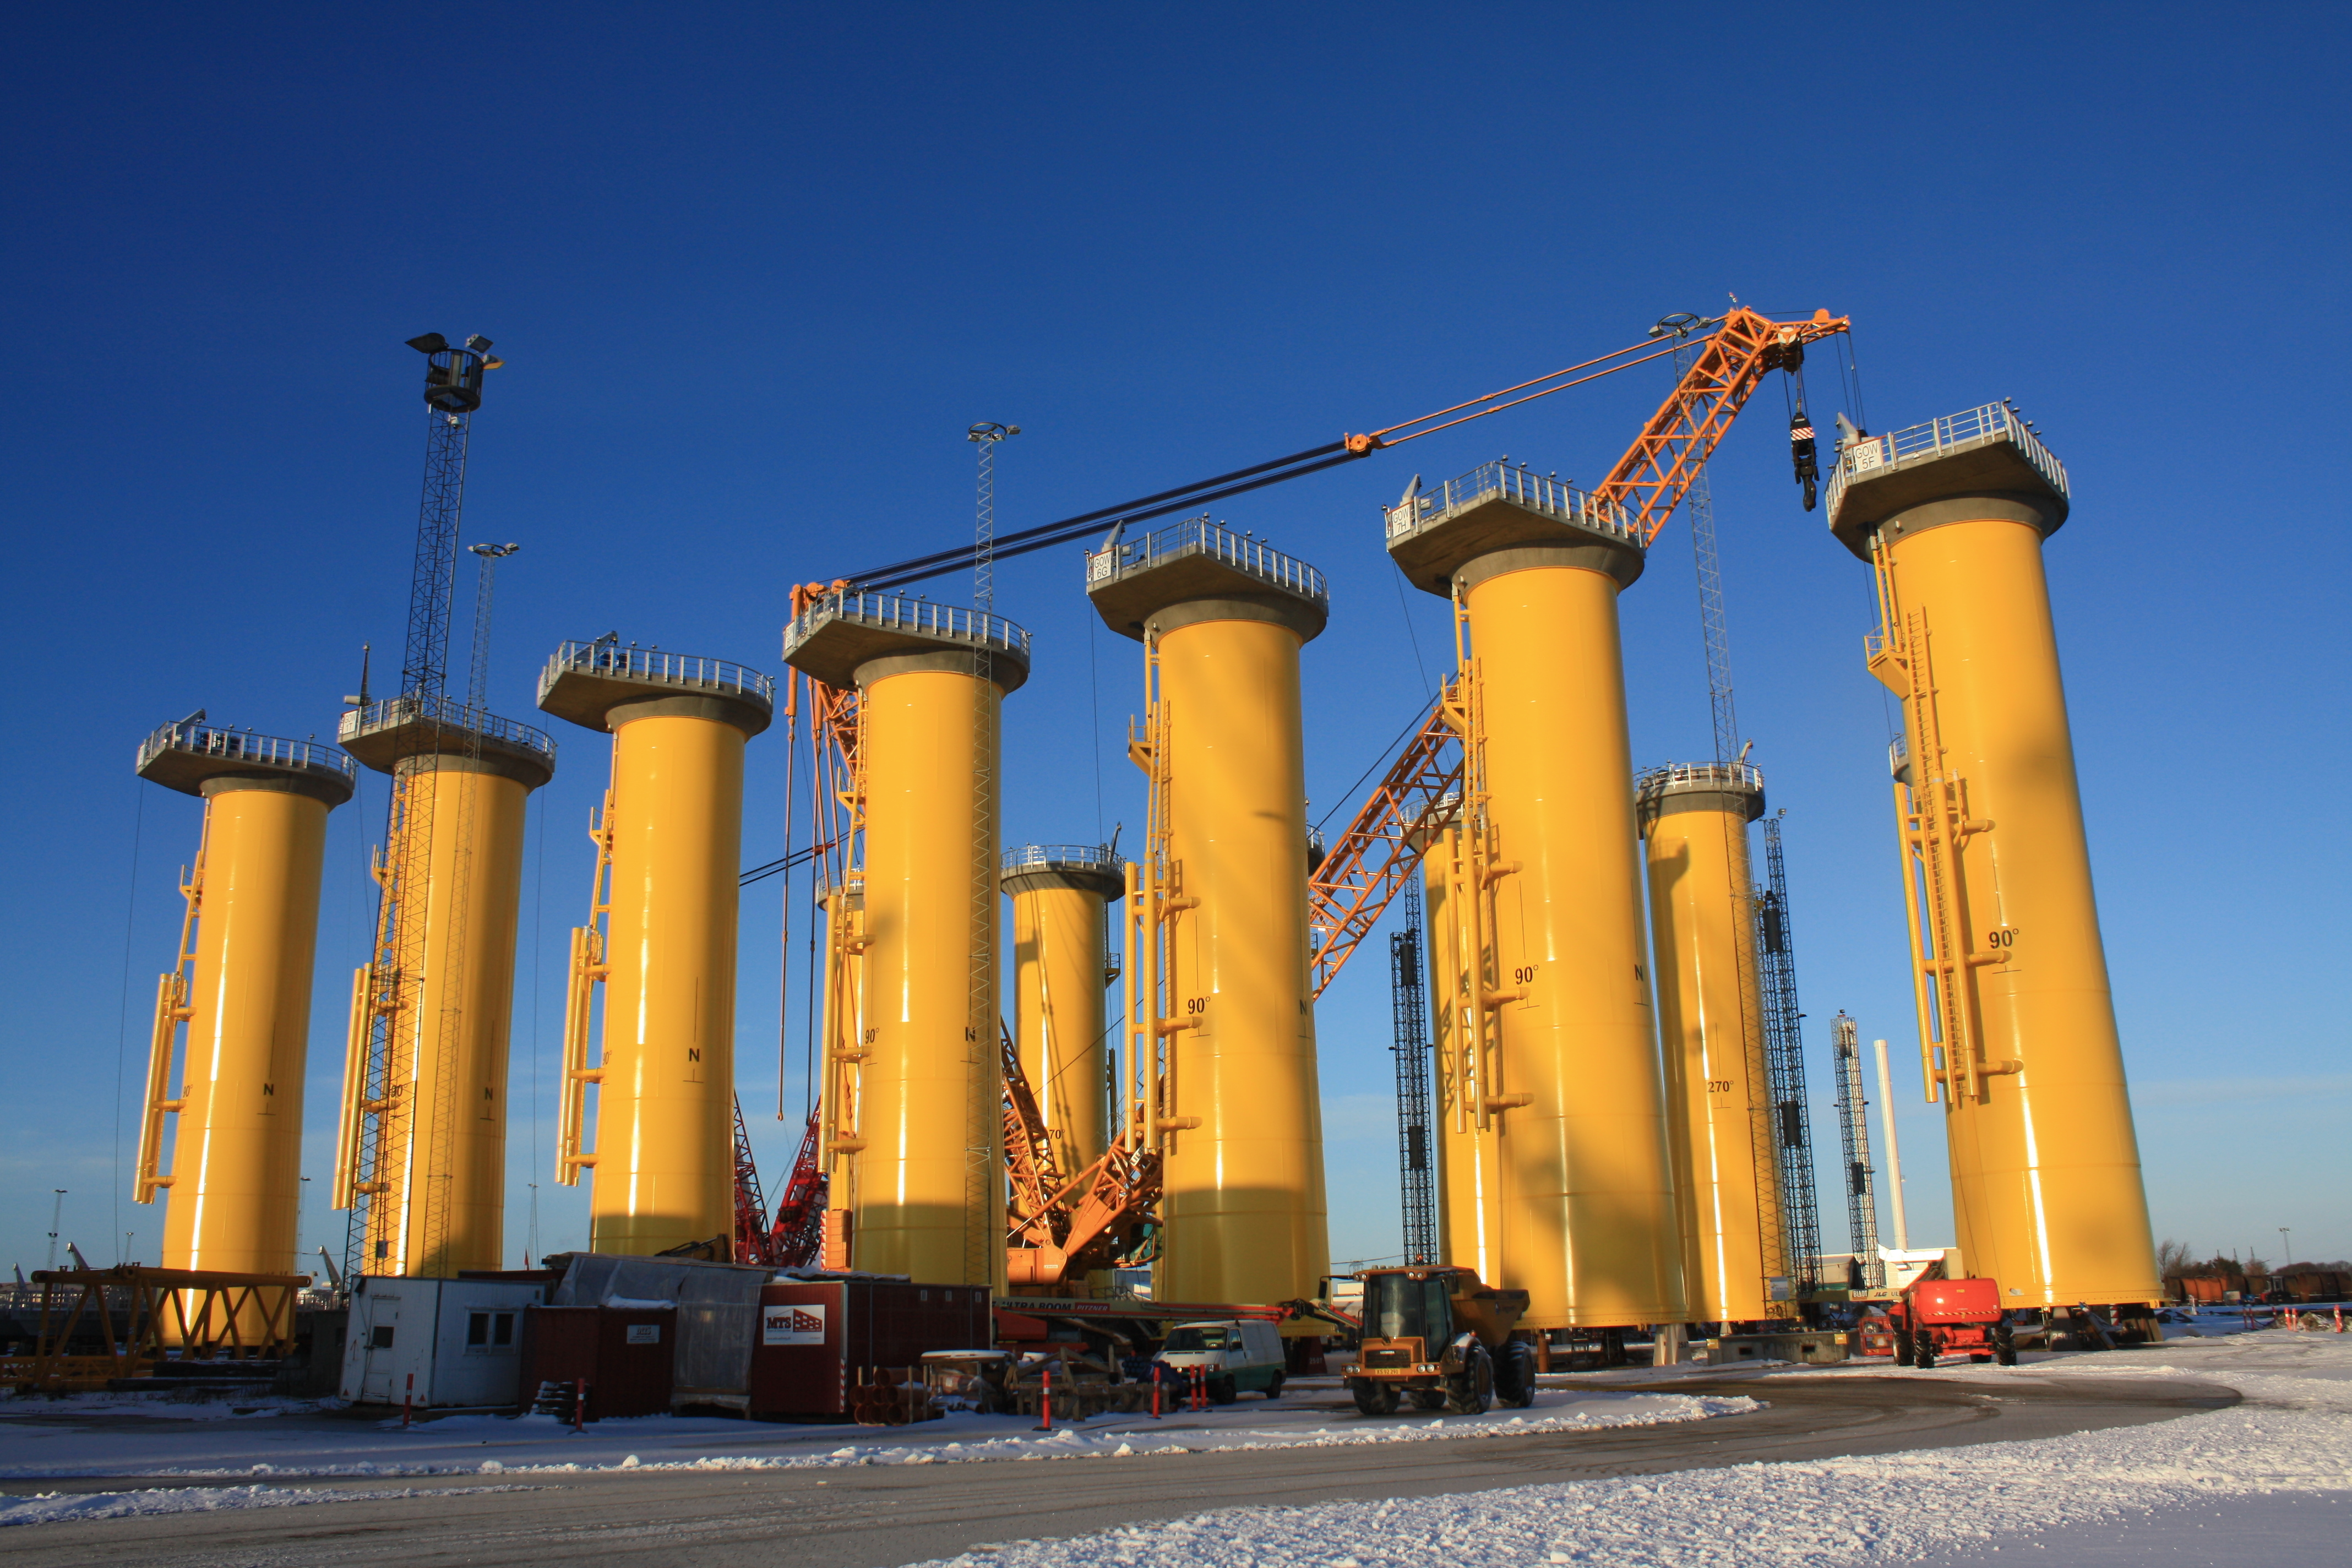 A photo of yellow tubular transition pieces at Bladt Industries' site in Denmark